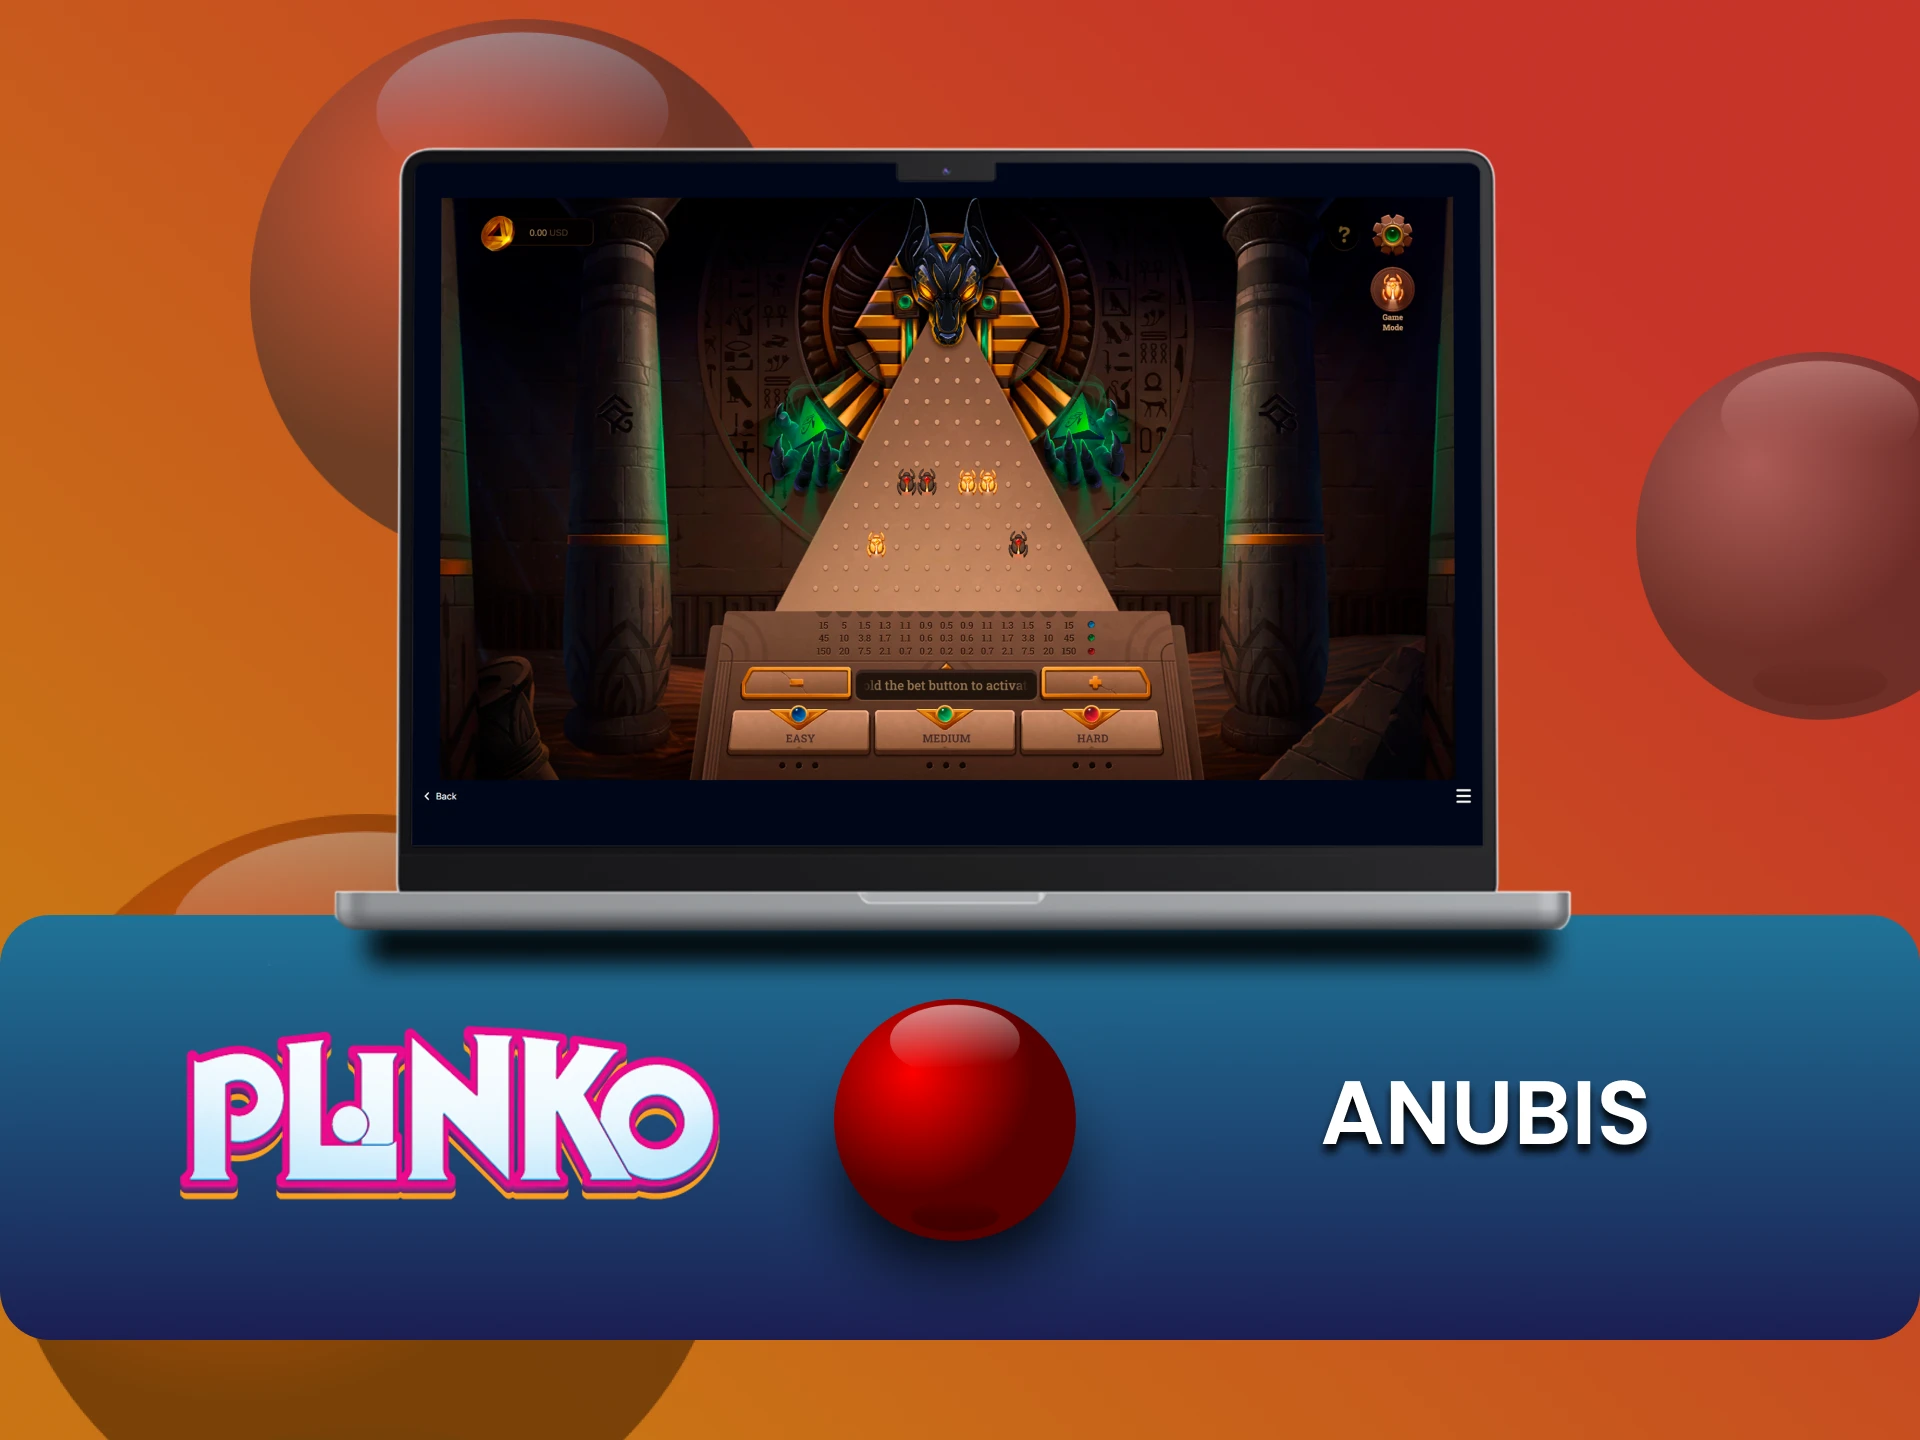 Try the Plinko Anubis version of the game.